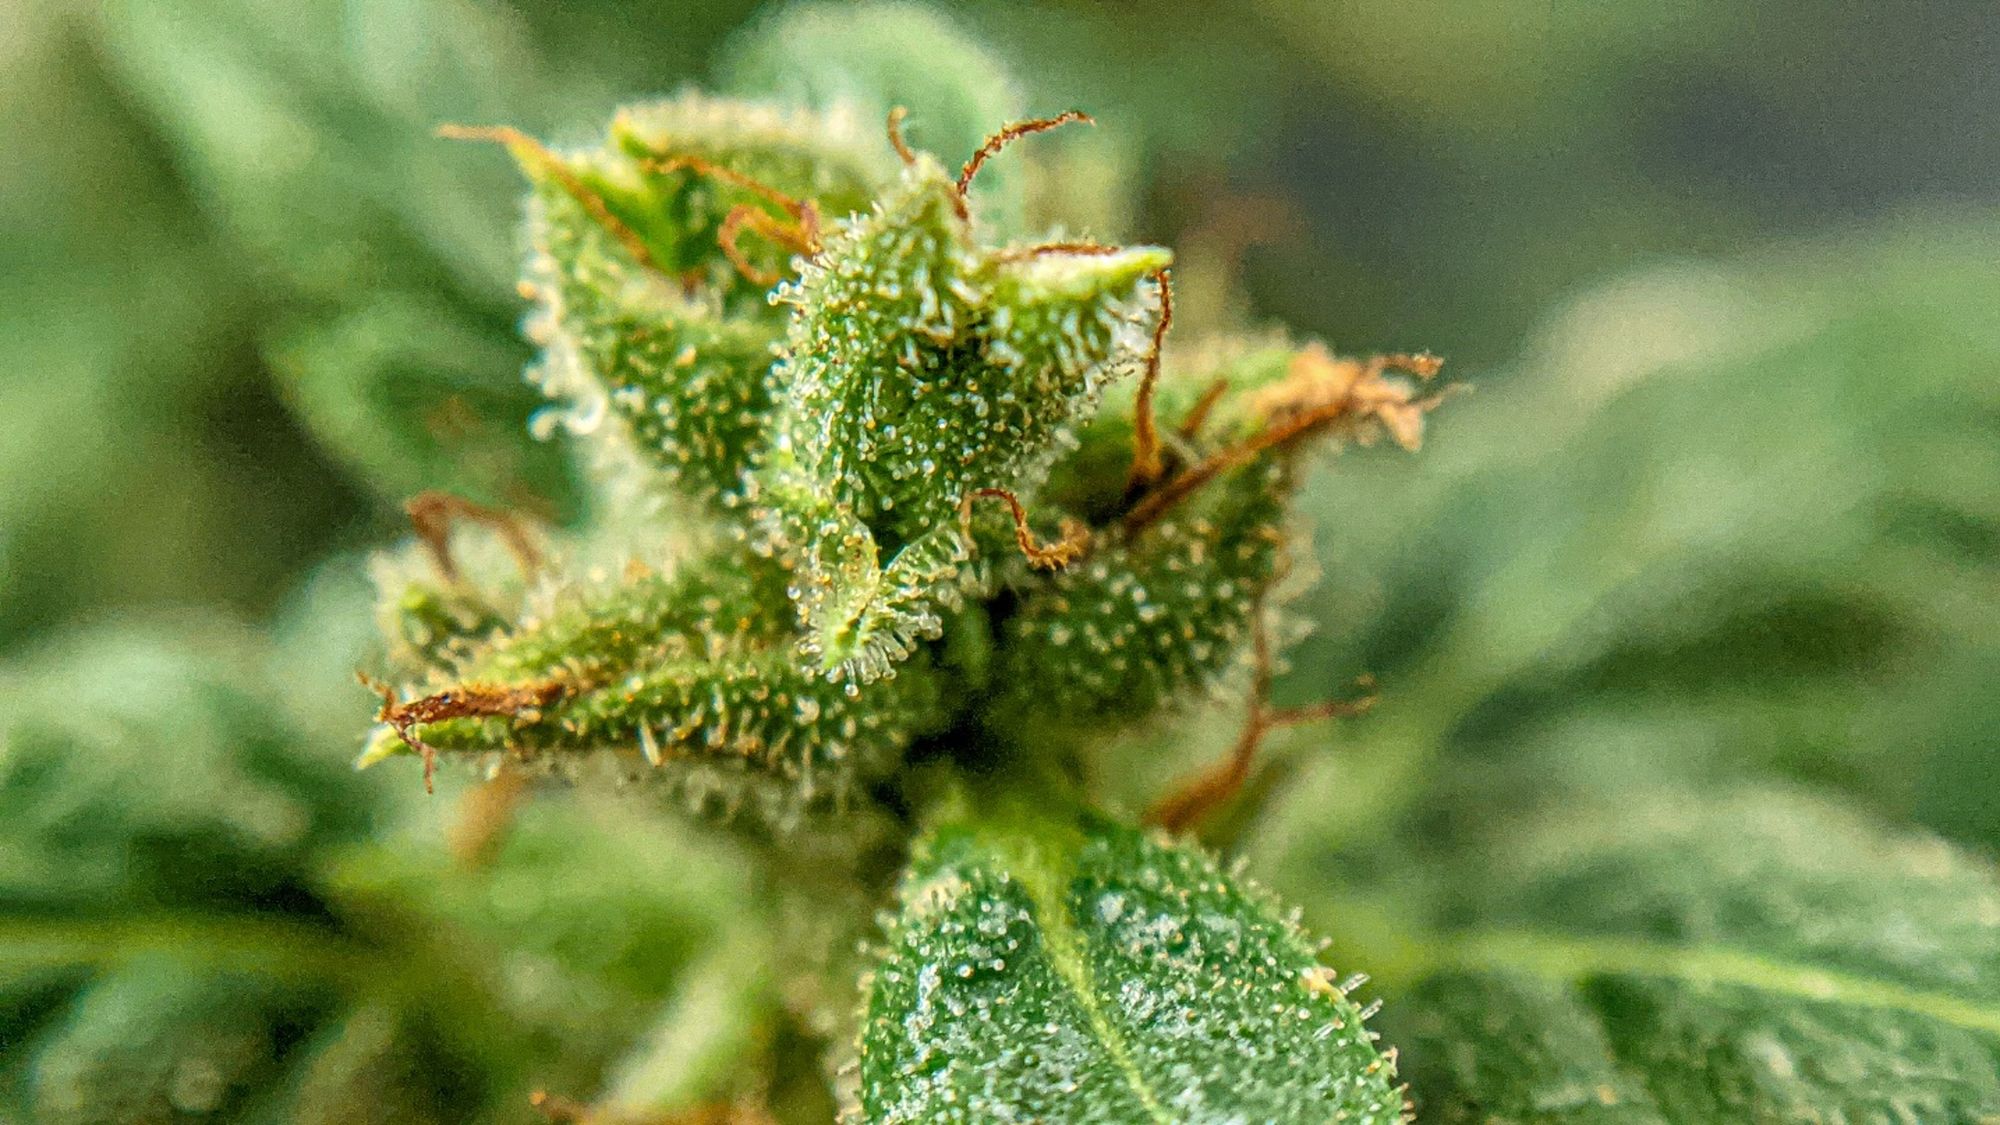 Close-up of cannabis cultivar “Cactus” bud in the flowering stage. Stalked trichomes appear amber in colour